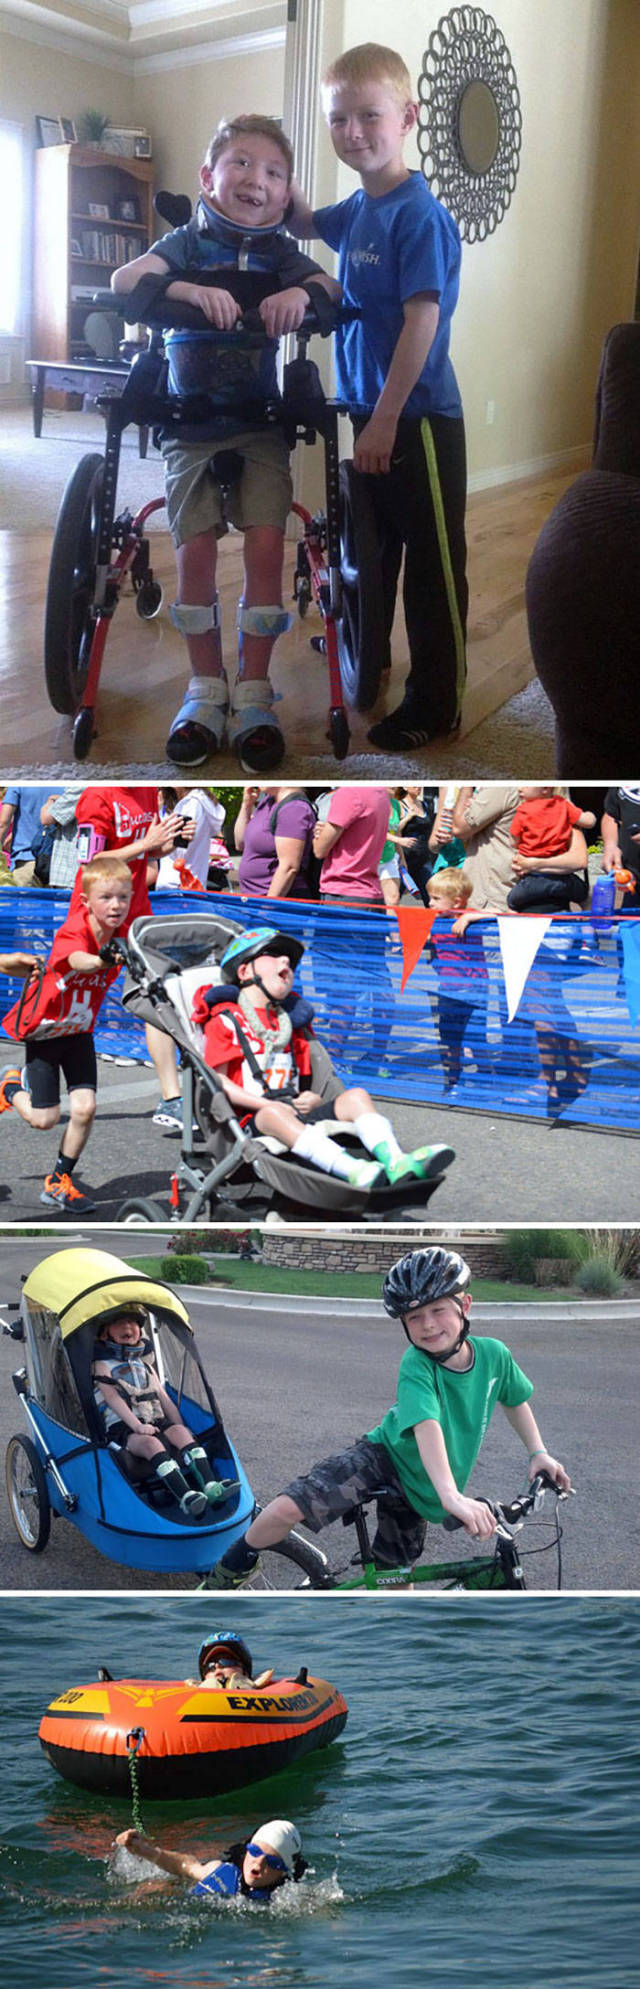 8-year-old Noah completes mini-triathlon with his disabled brother Lucas.